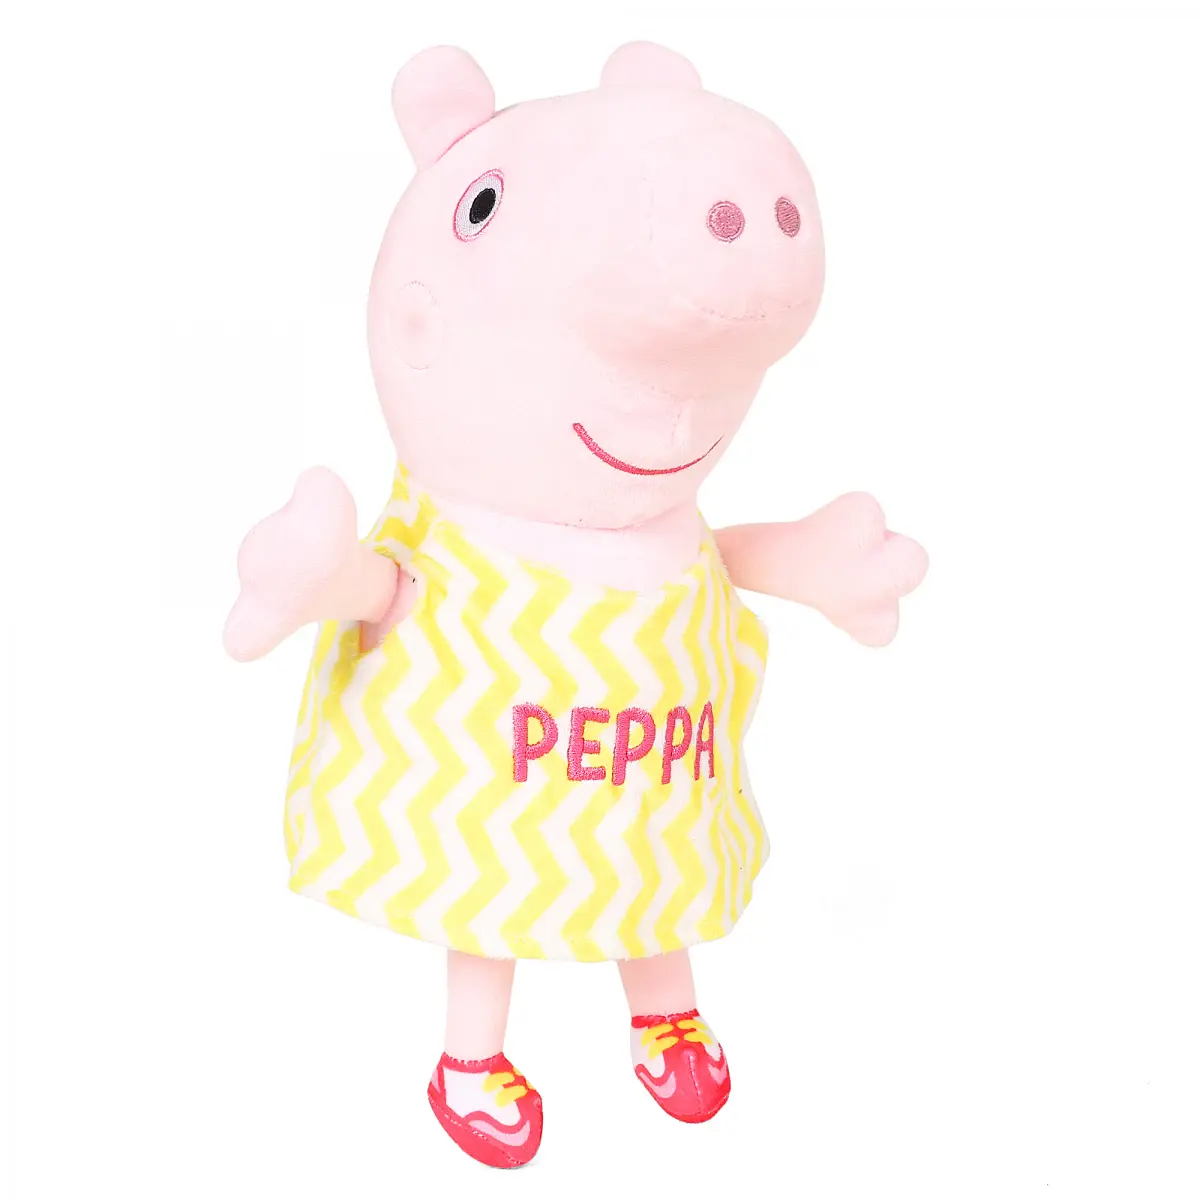 Peppa Pig Soft Toys for Kids, 30cm, 18M+, Yellow